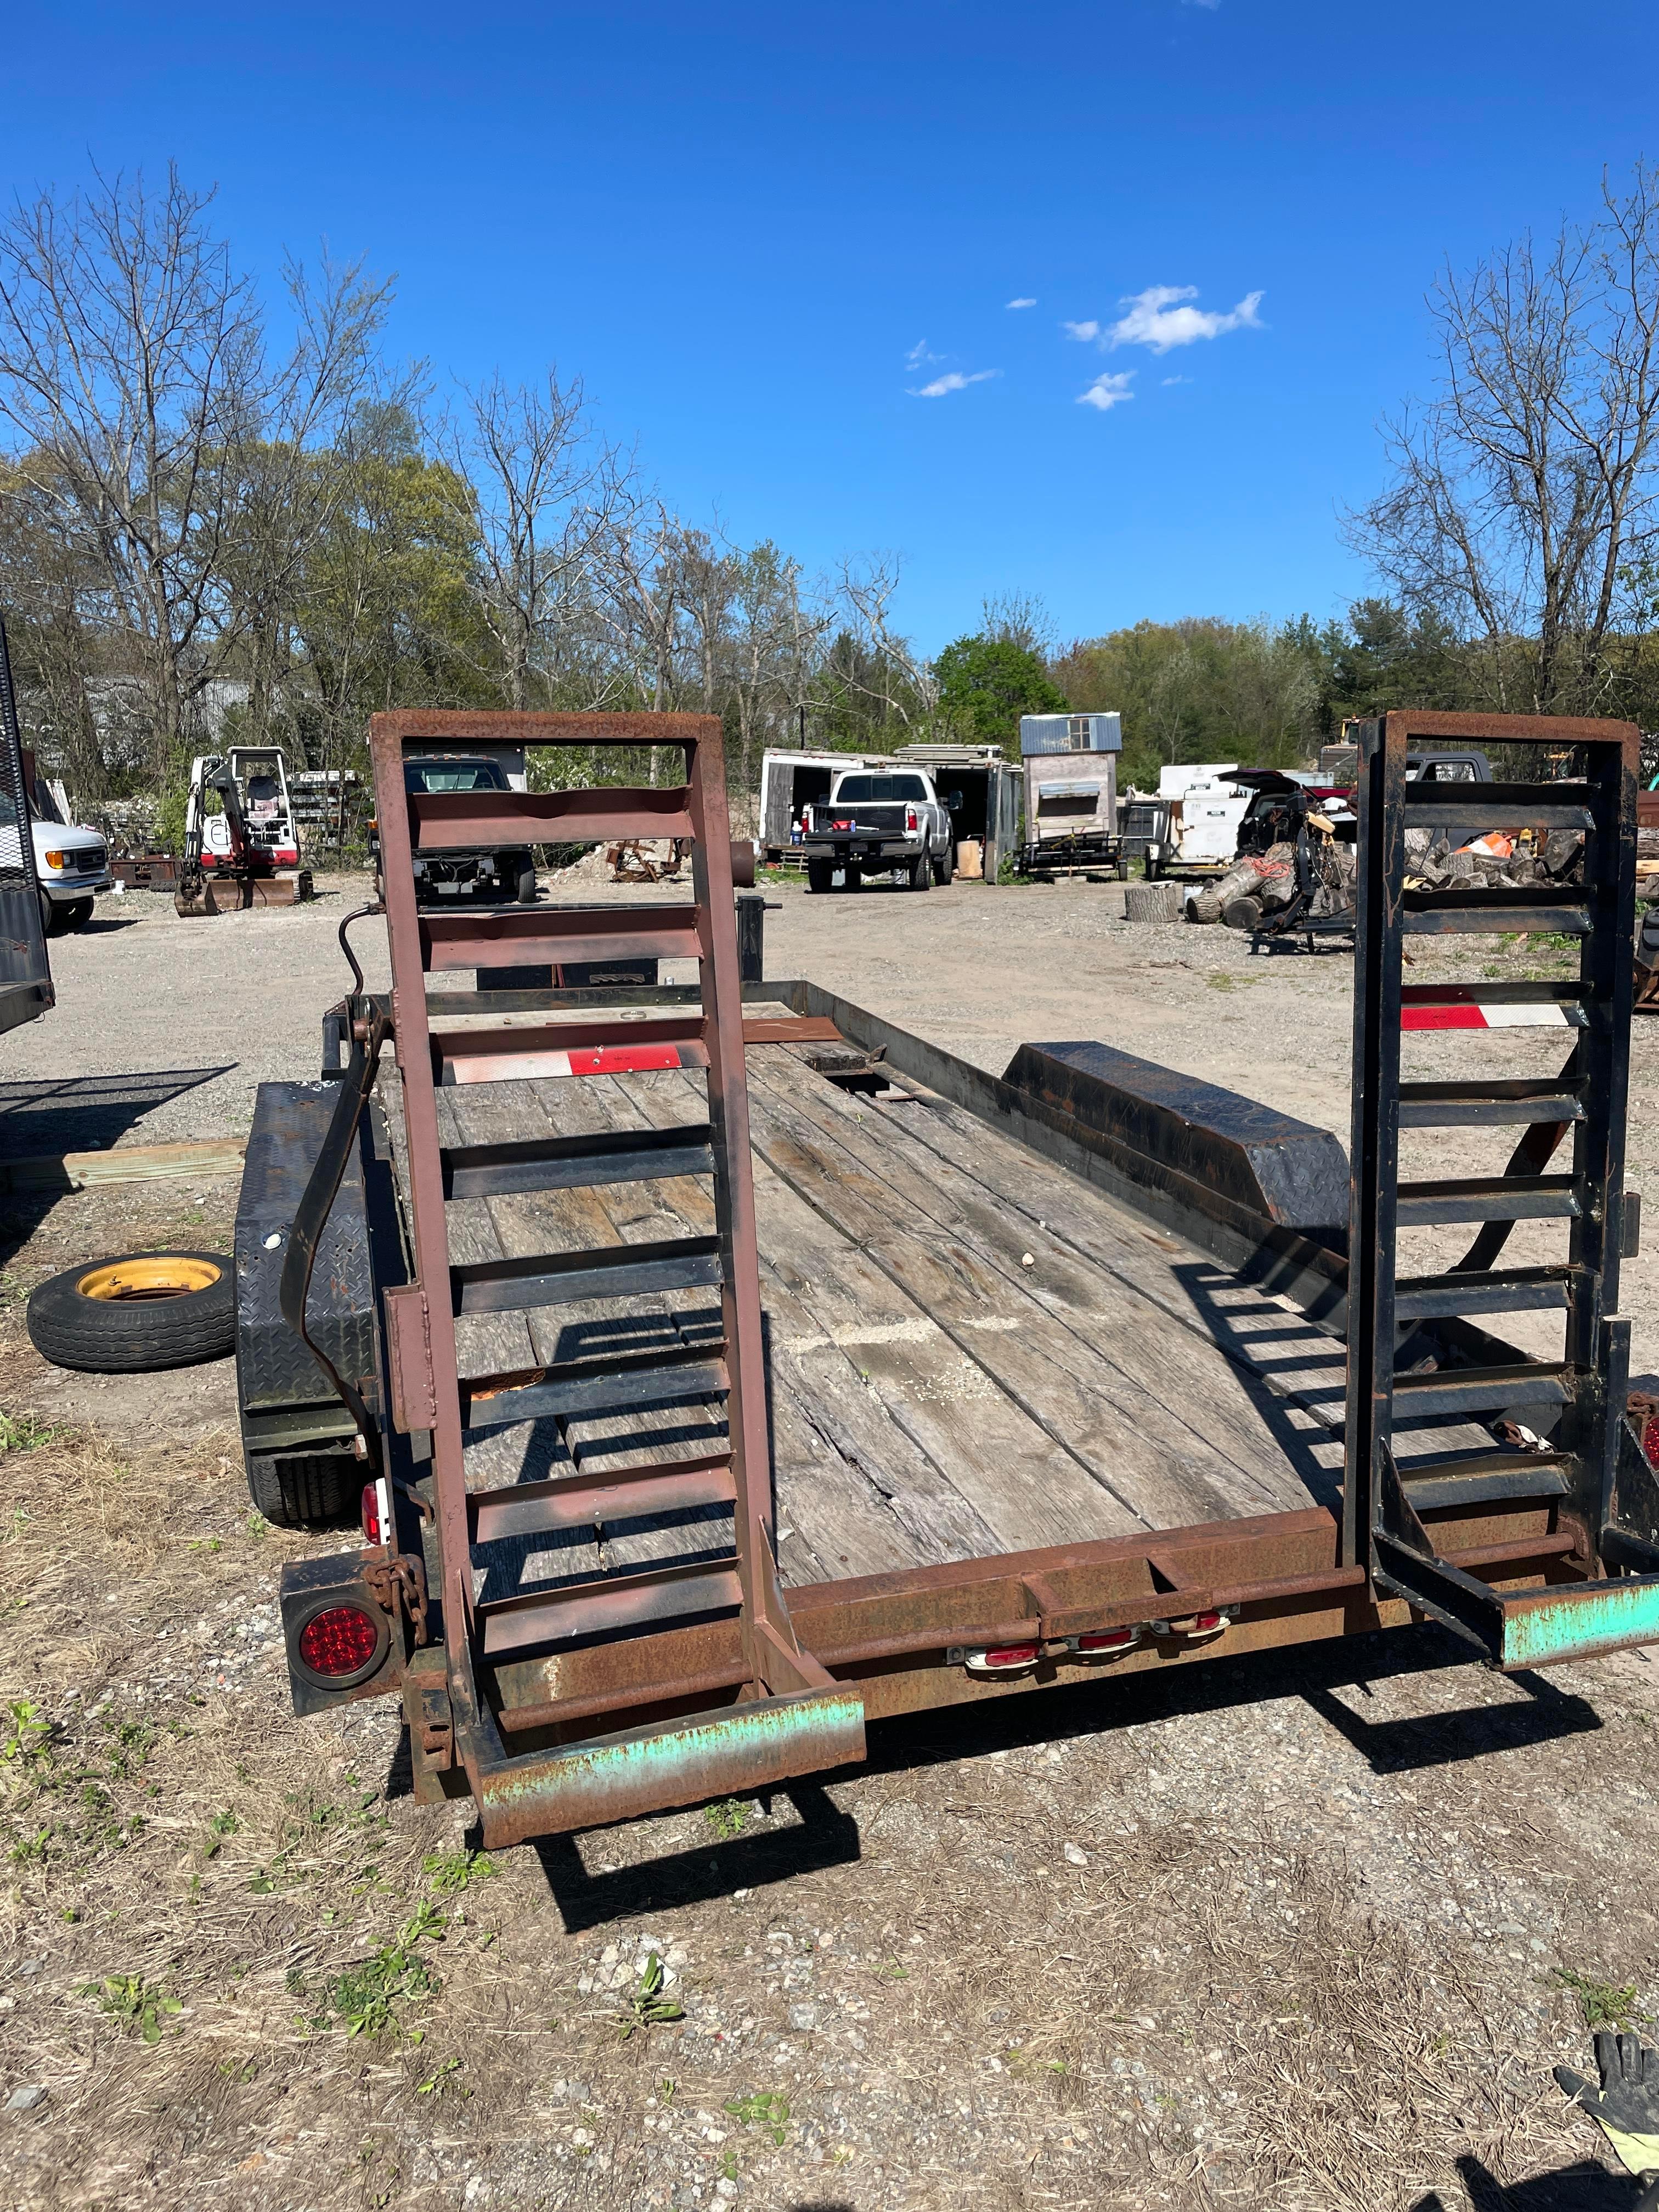 18' x 6'10" Tandem Axle Wood Deck Trailer with 2 Ramps, Brakes, Ball Hitch and Landing Gear (NO